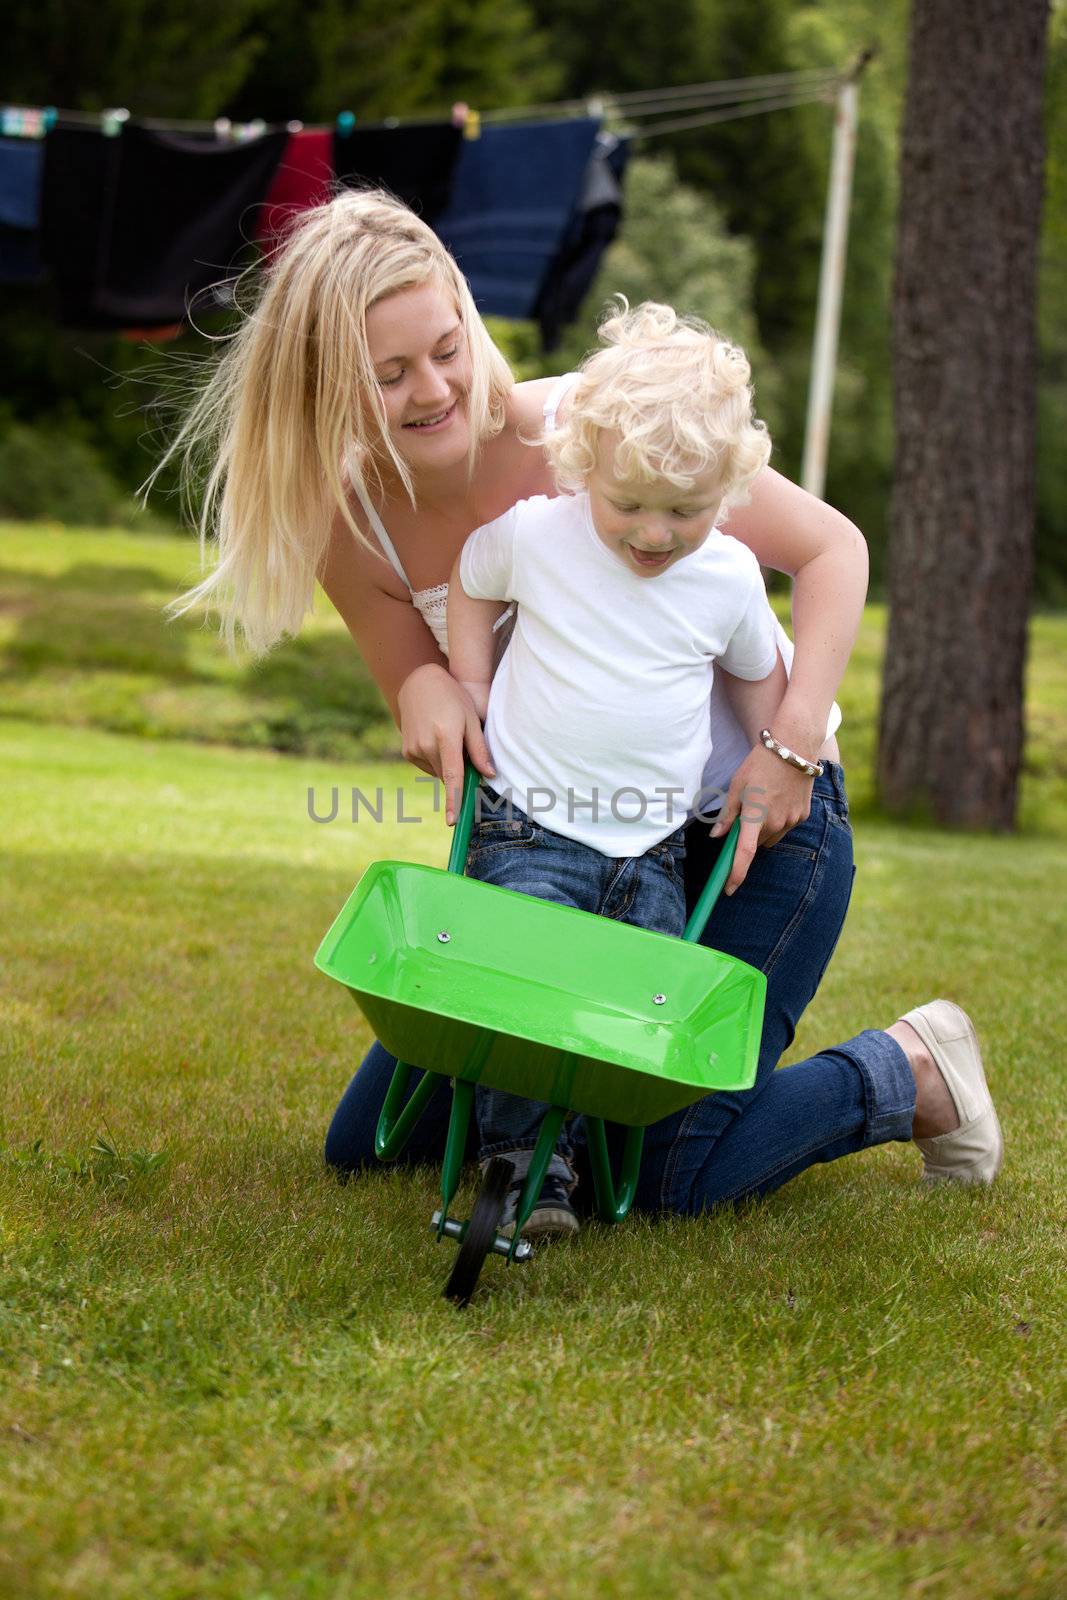 A young mother playing with her toddler son outdoors in a rural setting